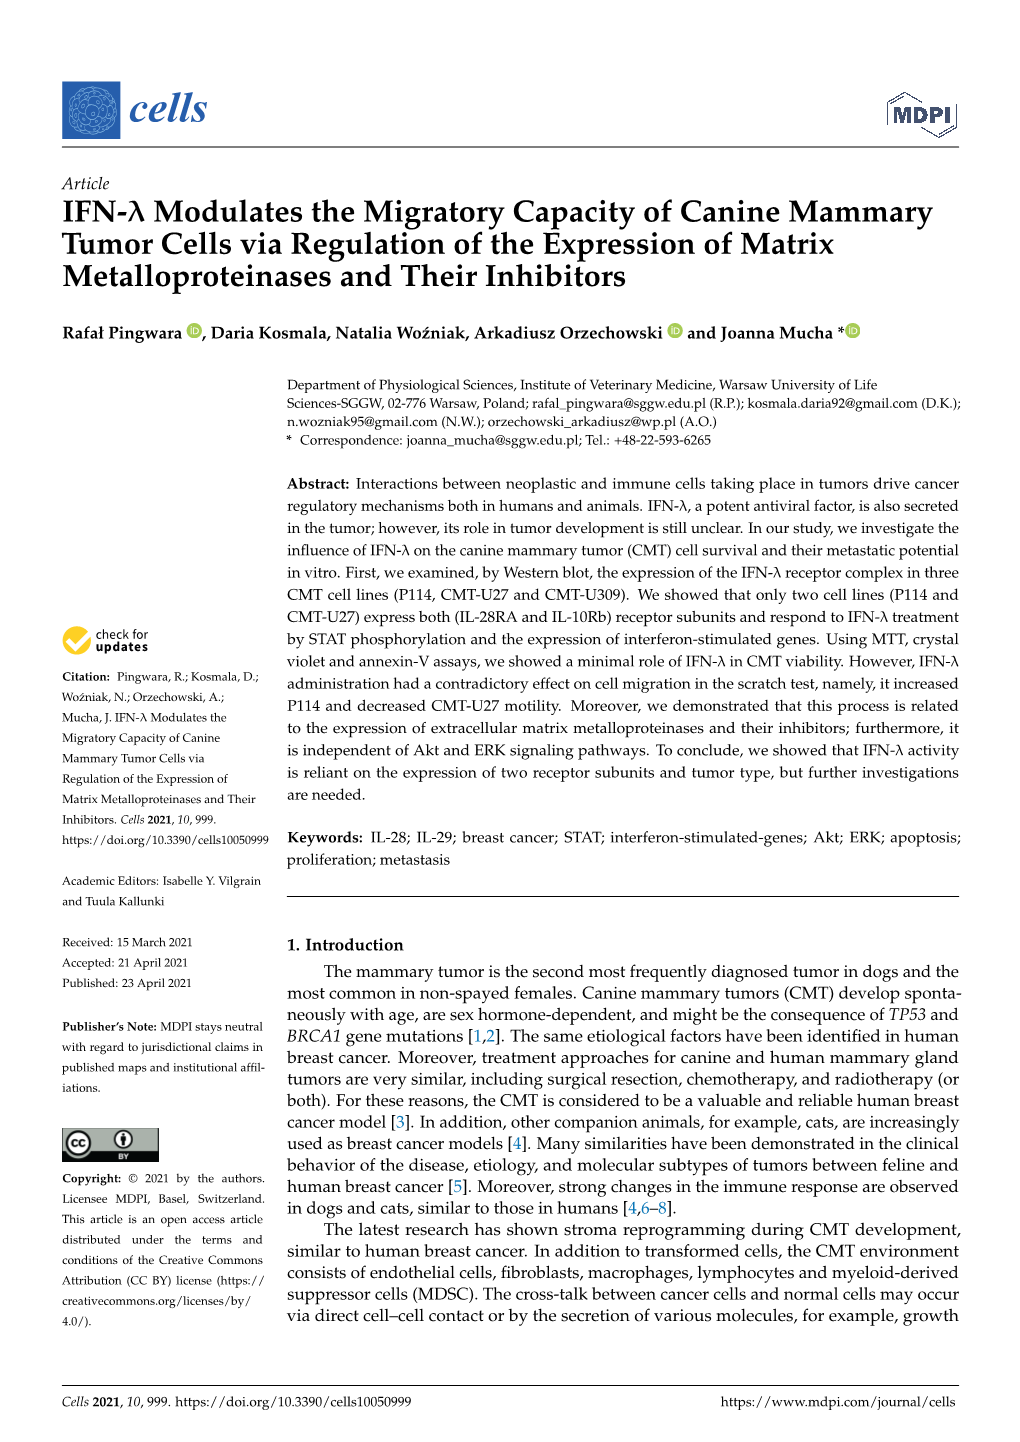 Modulates the Migratory Capacity of Canine Mammary Tumor Cells Via Regulation of the Expression of Matrix Metalloproteinases and Their Inhibitors